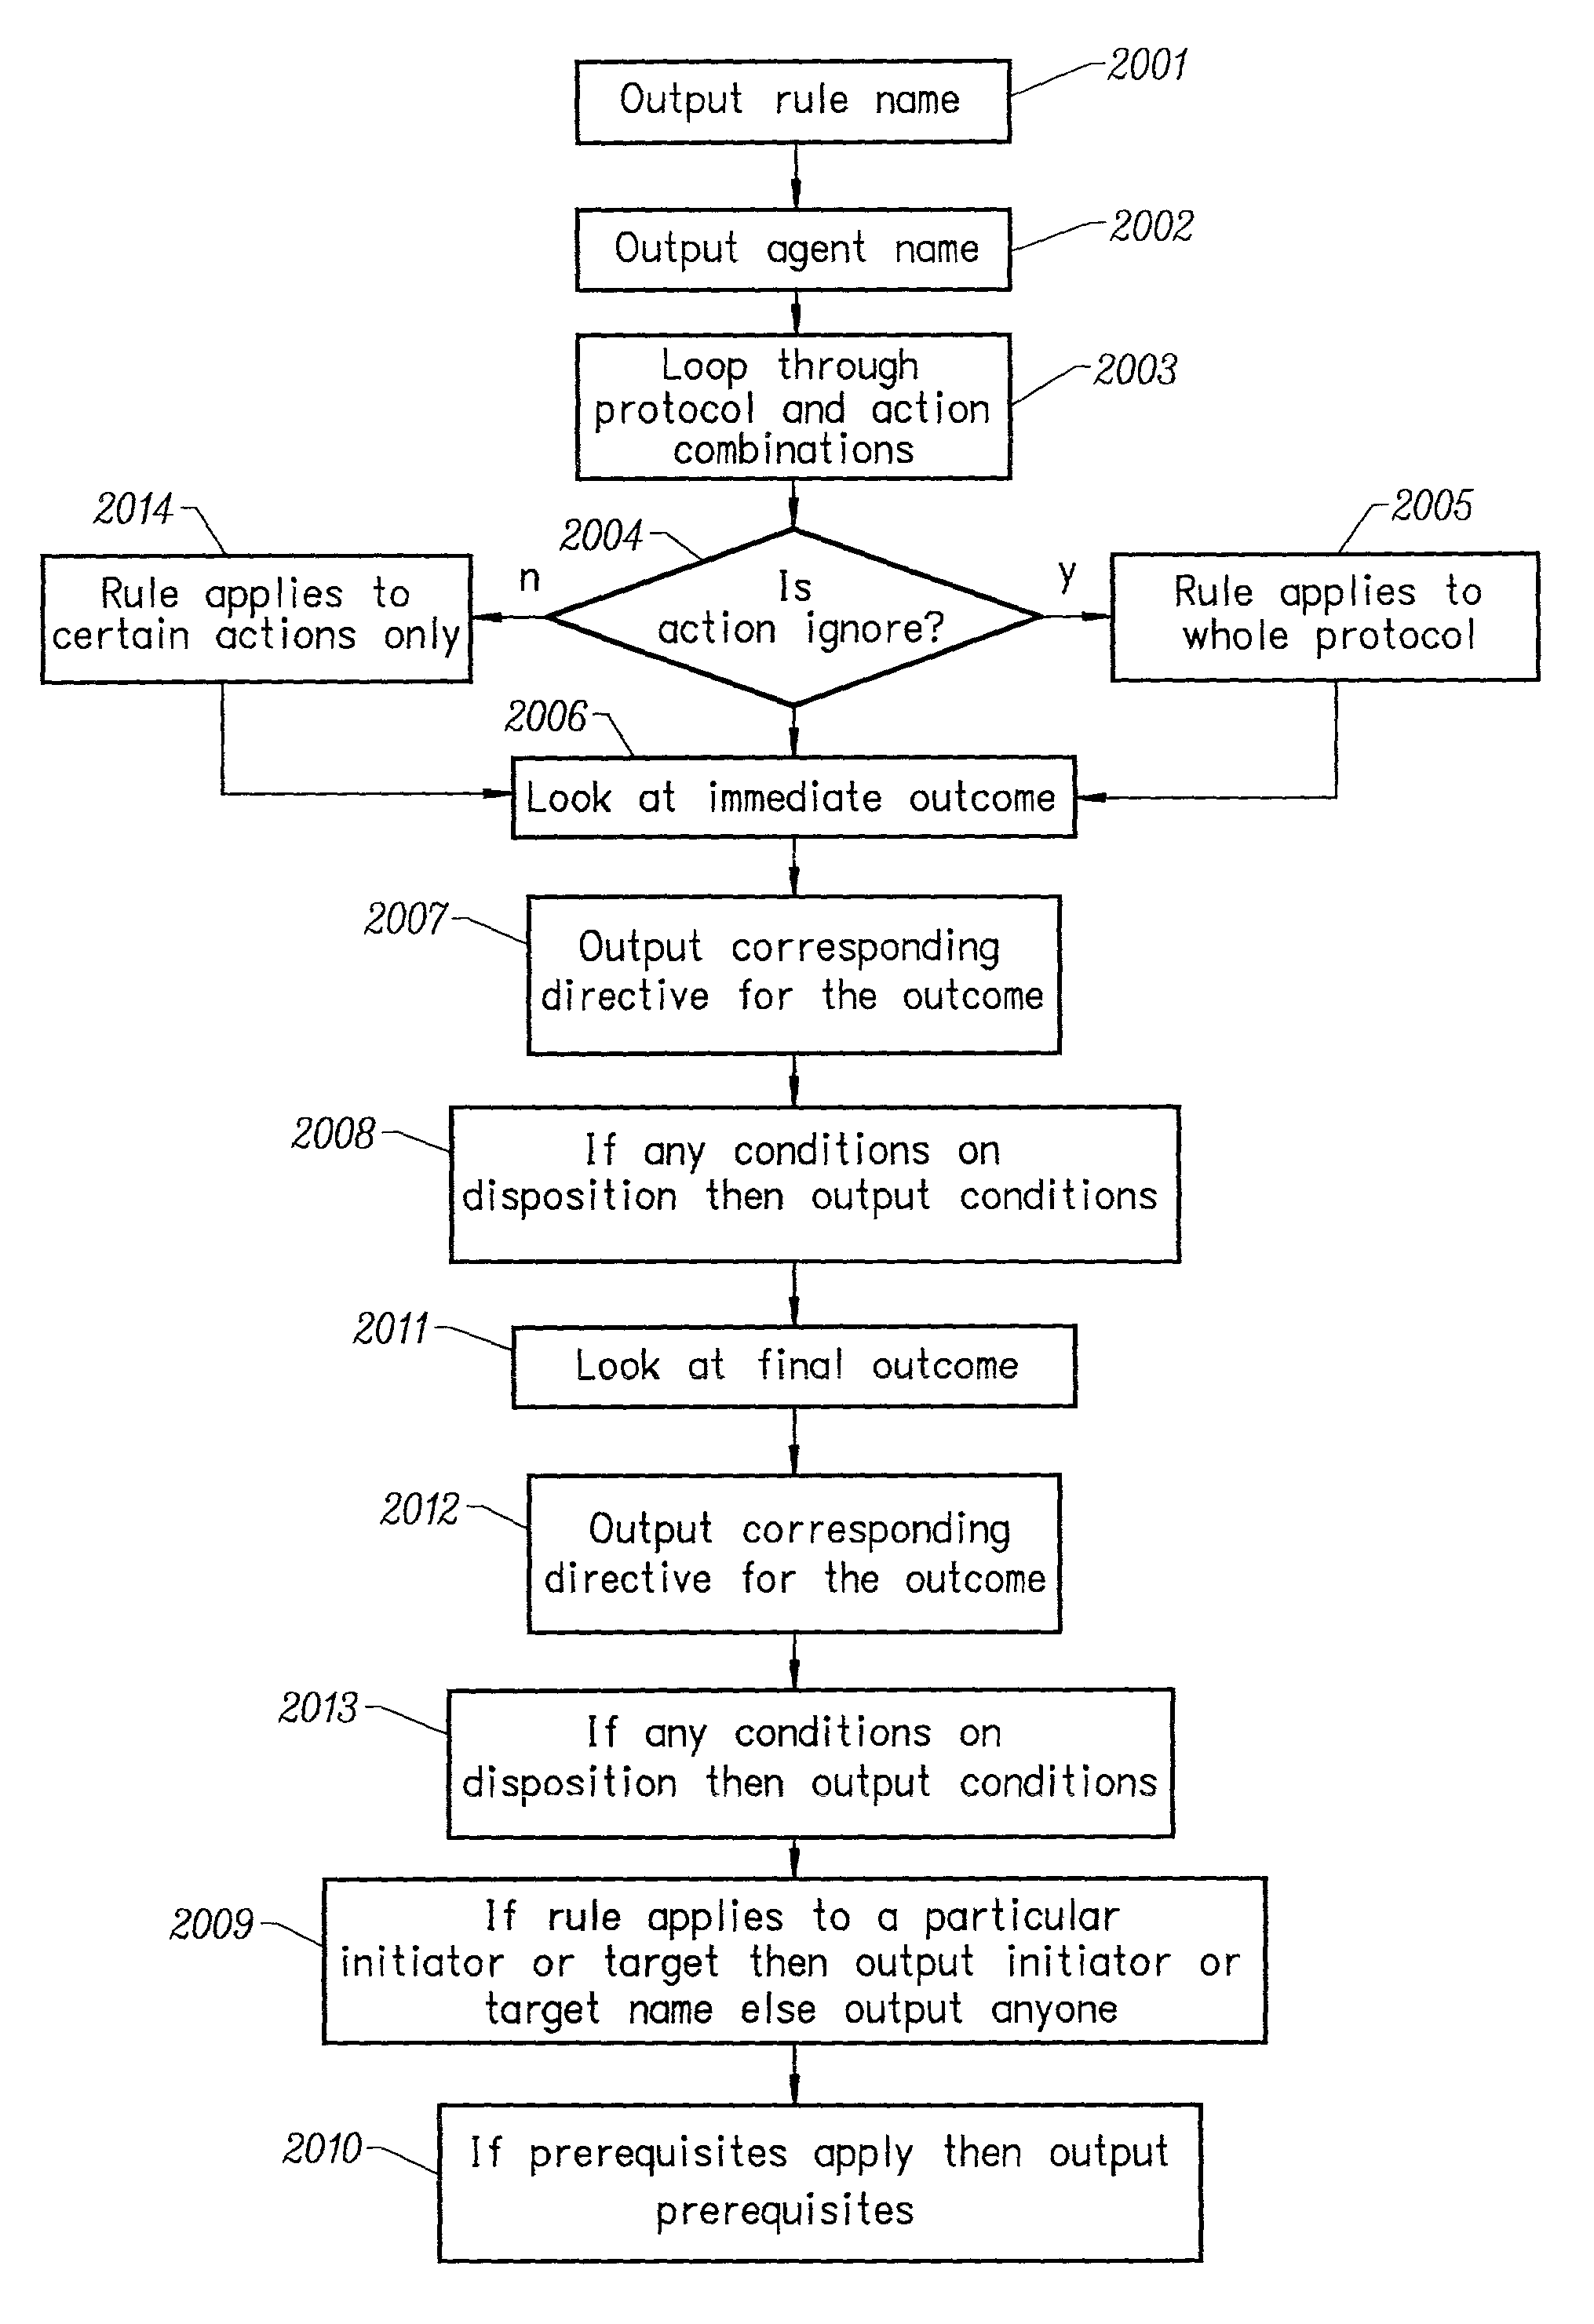 Automated generation of an english language representation of a formal network security policy specification